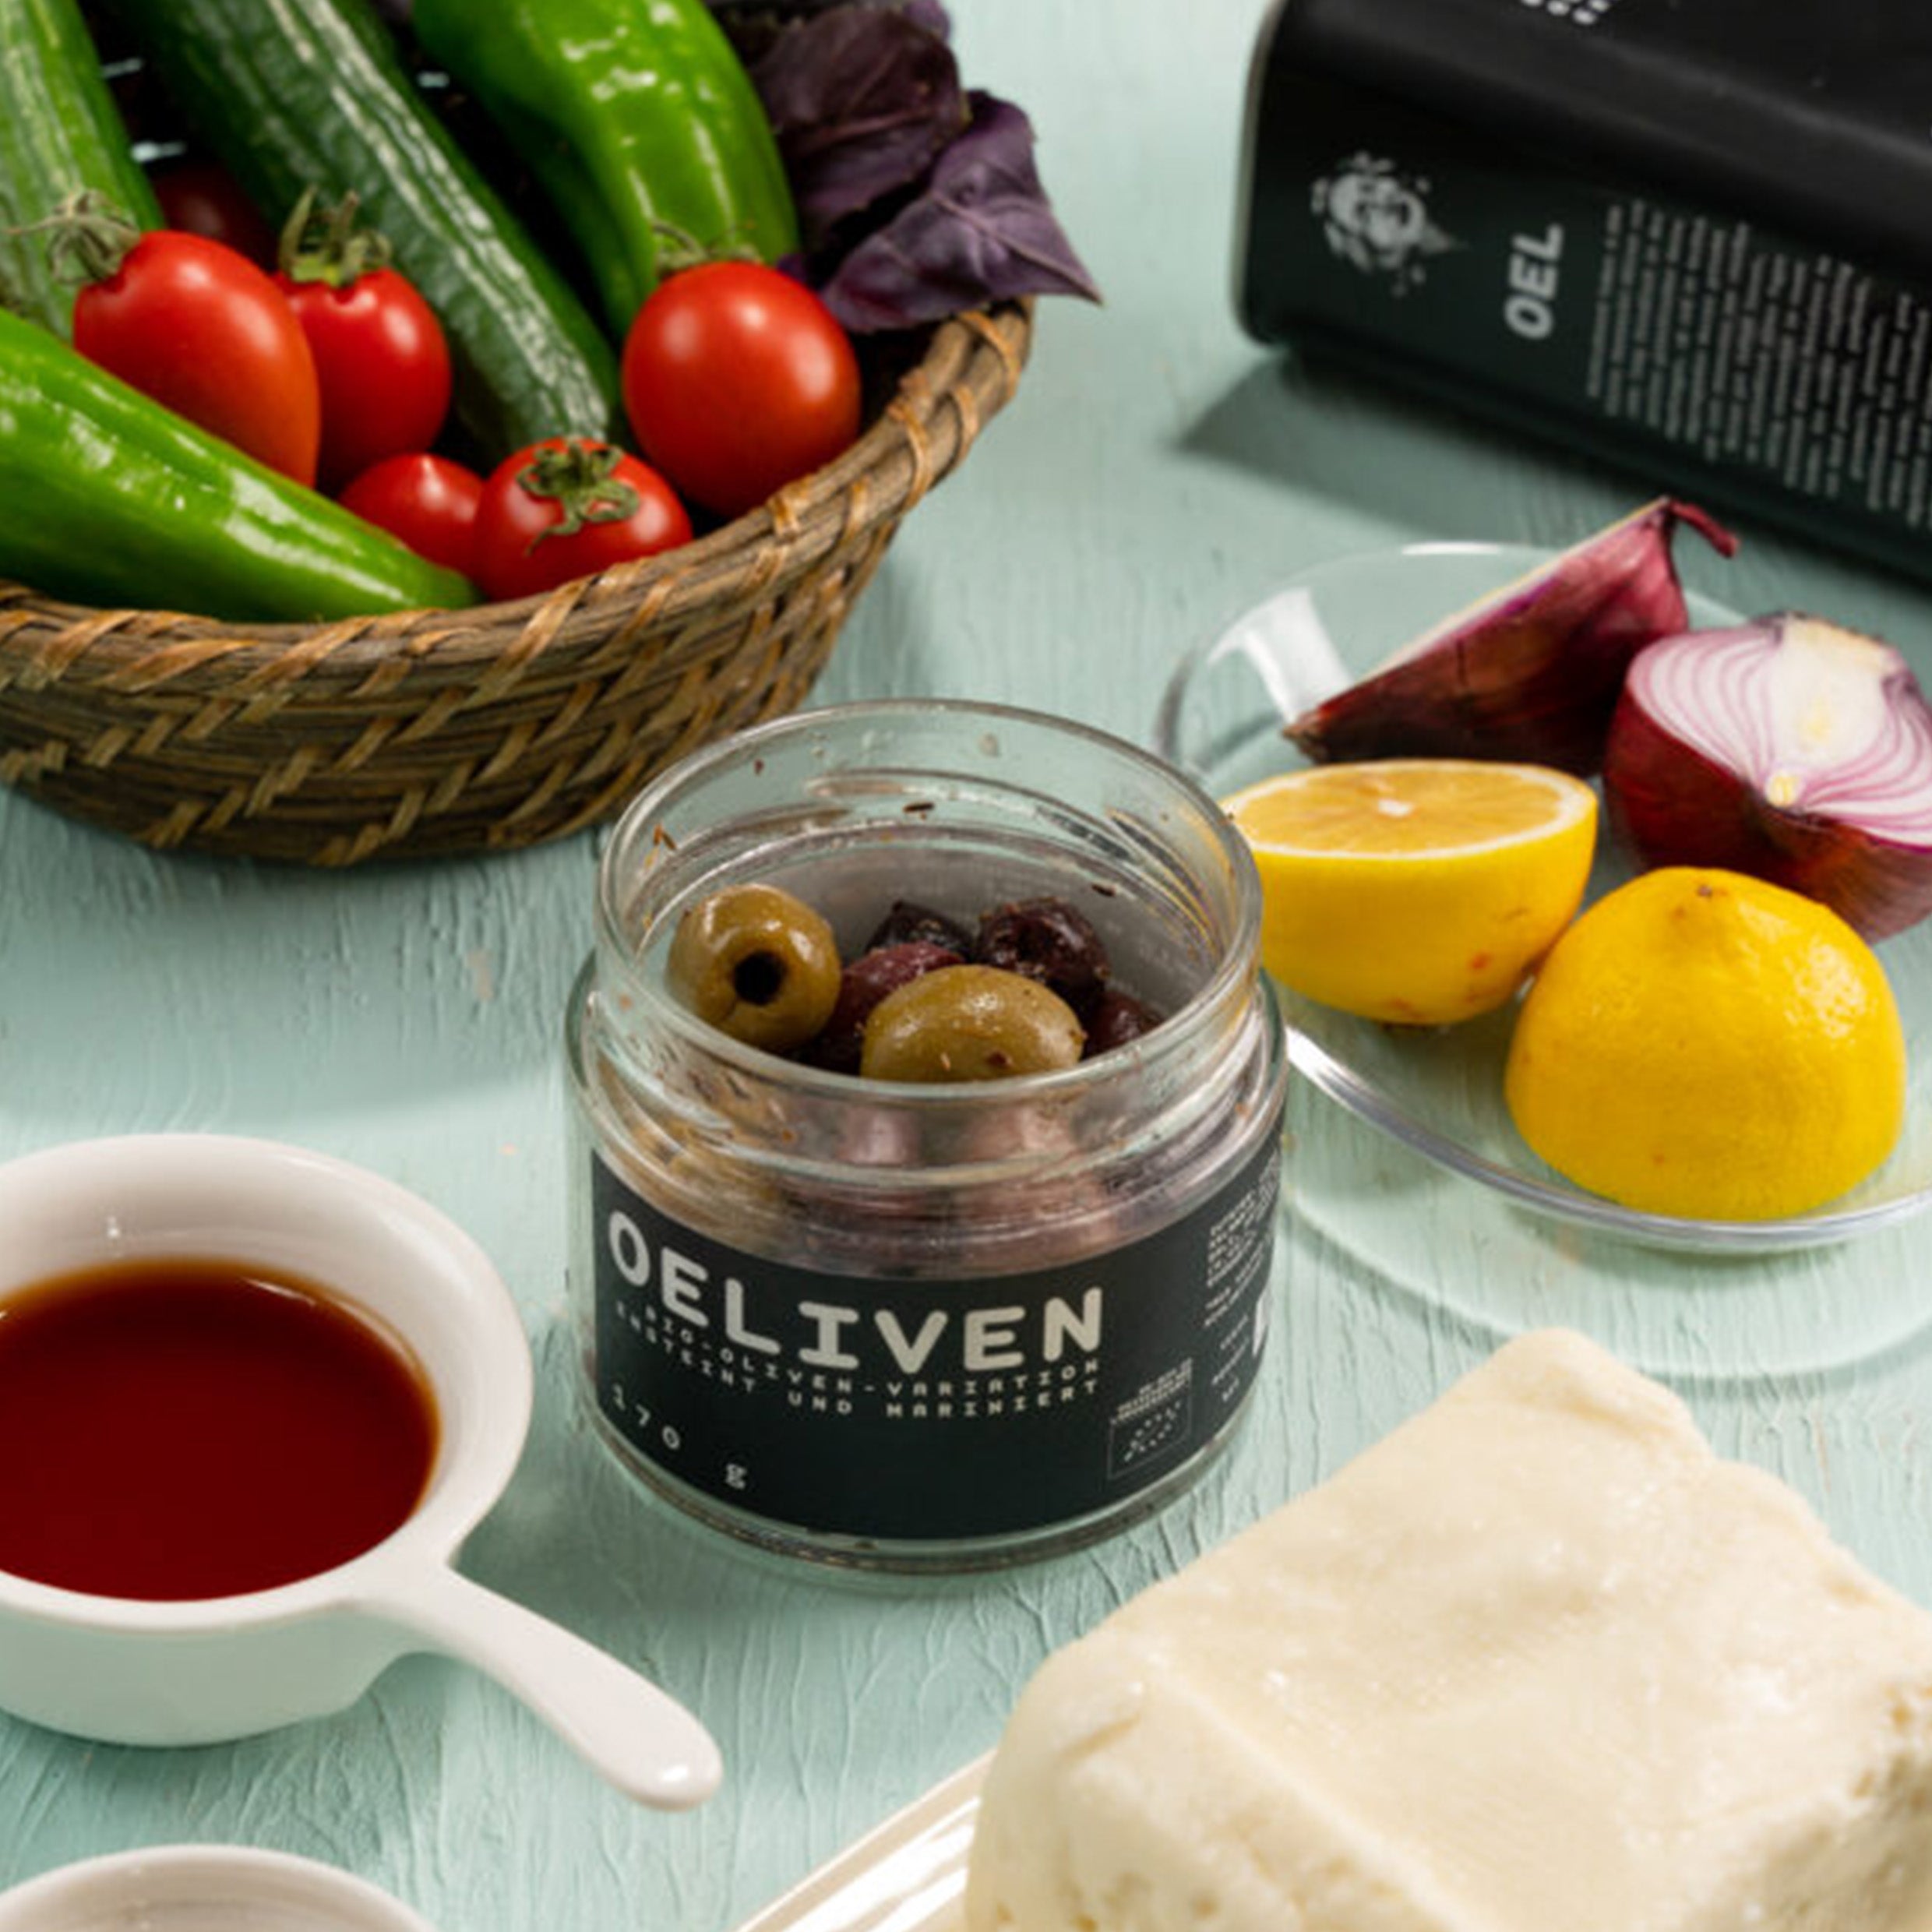 OELiven Green 2,000 g - Green organic olives with herbs